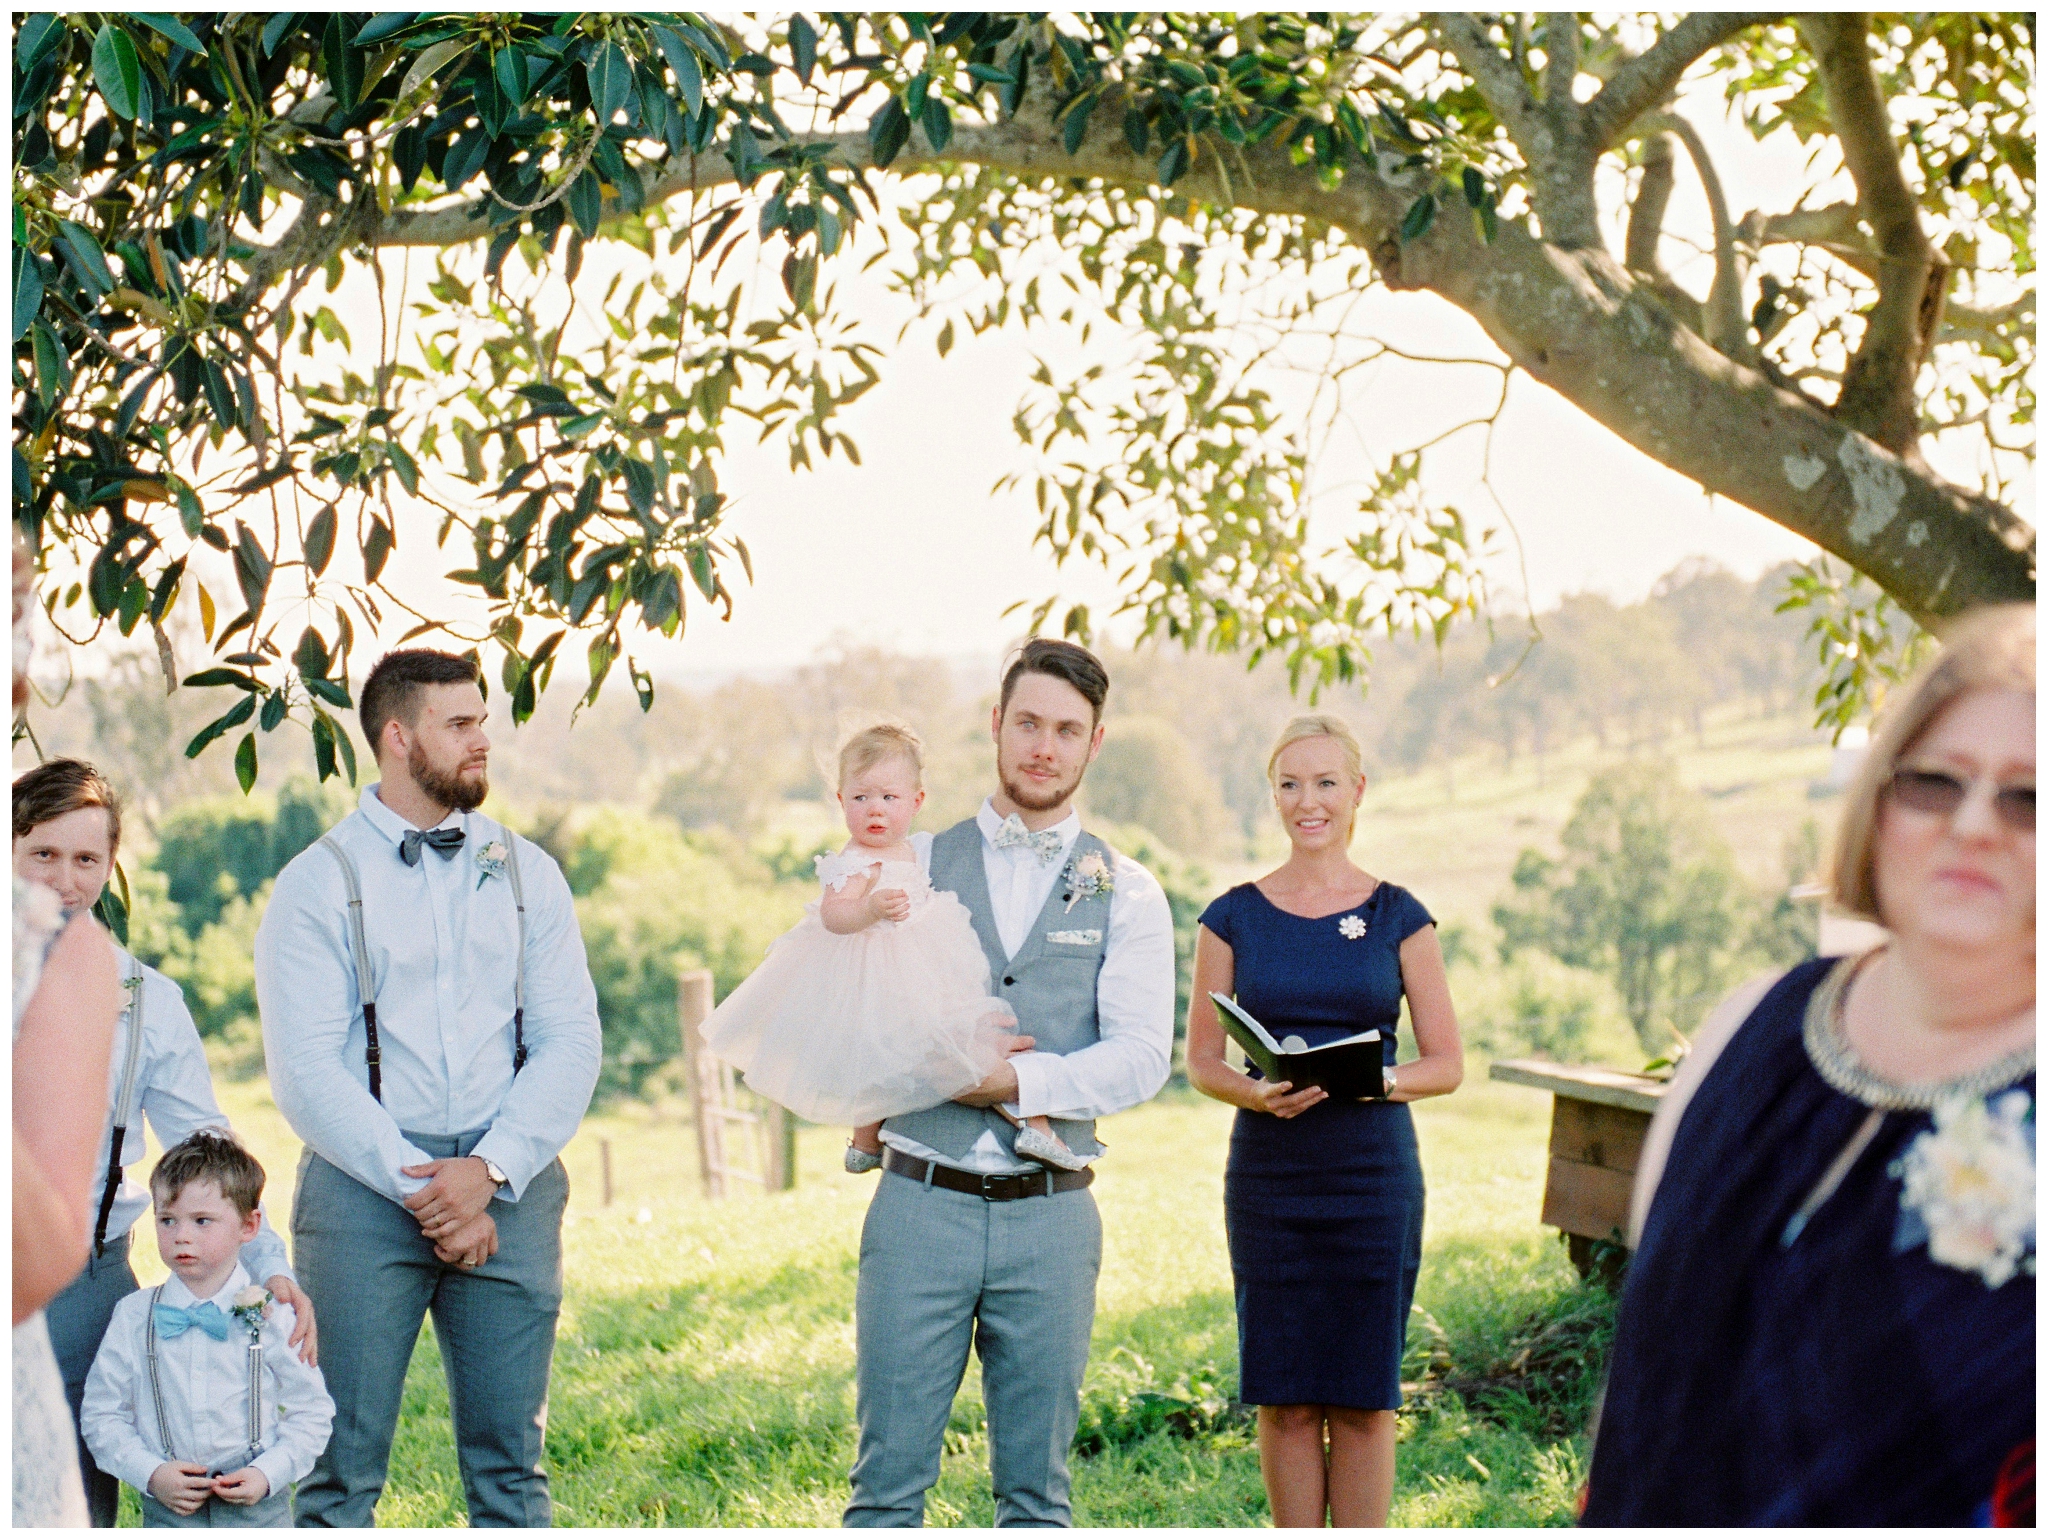 Tegan and Alex Wedding at Albert River Wines by Casey Jane Photography 30